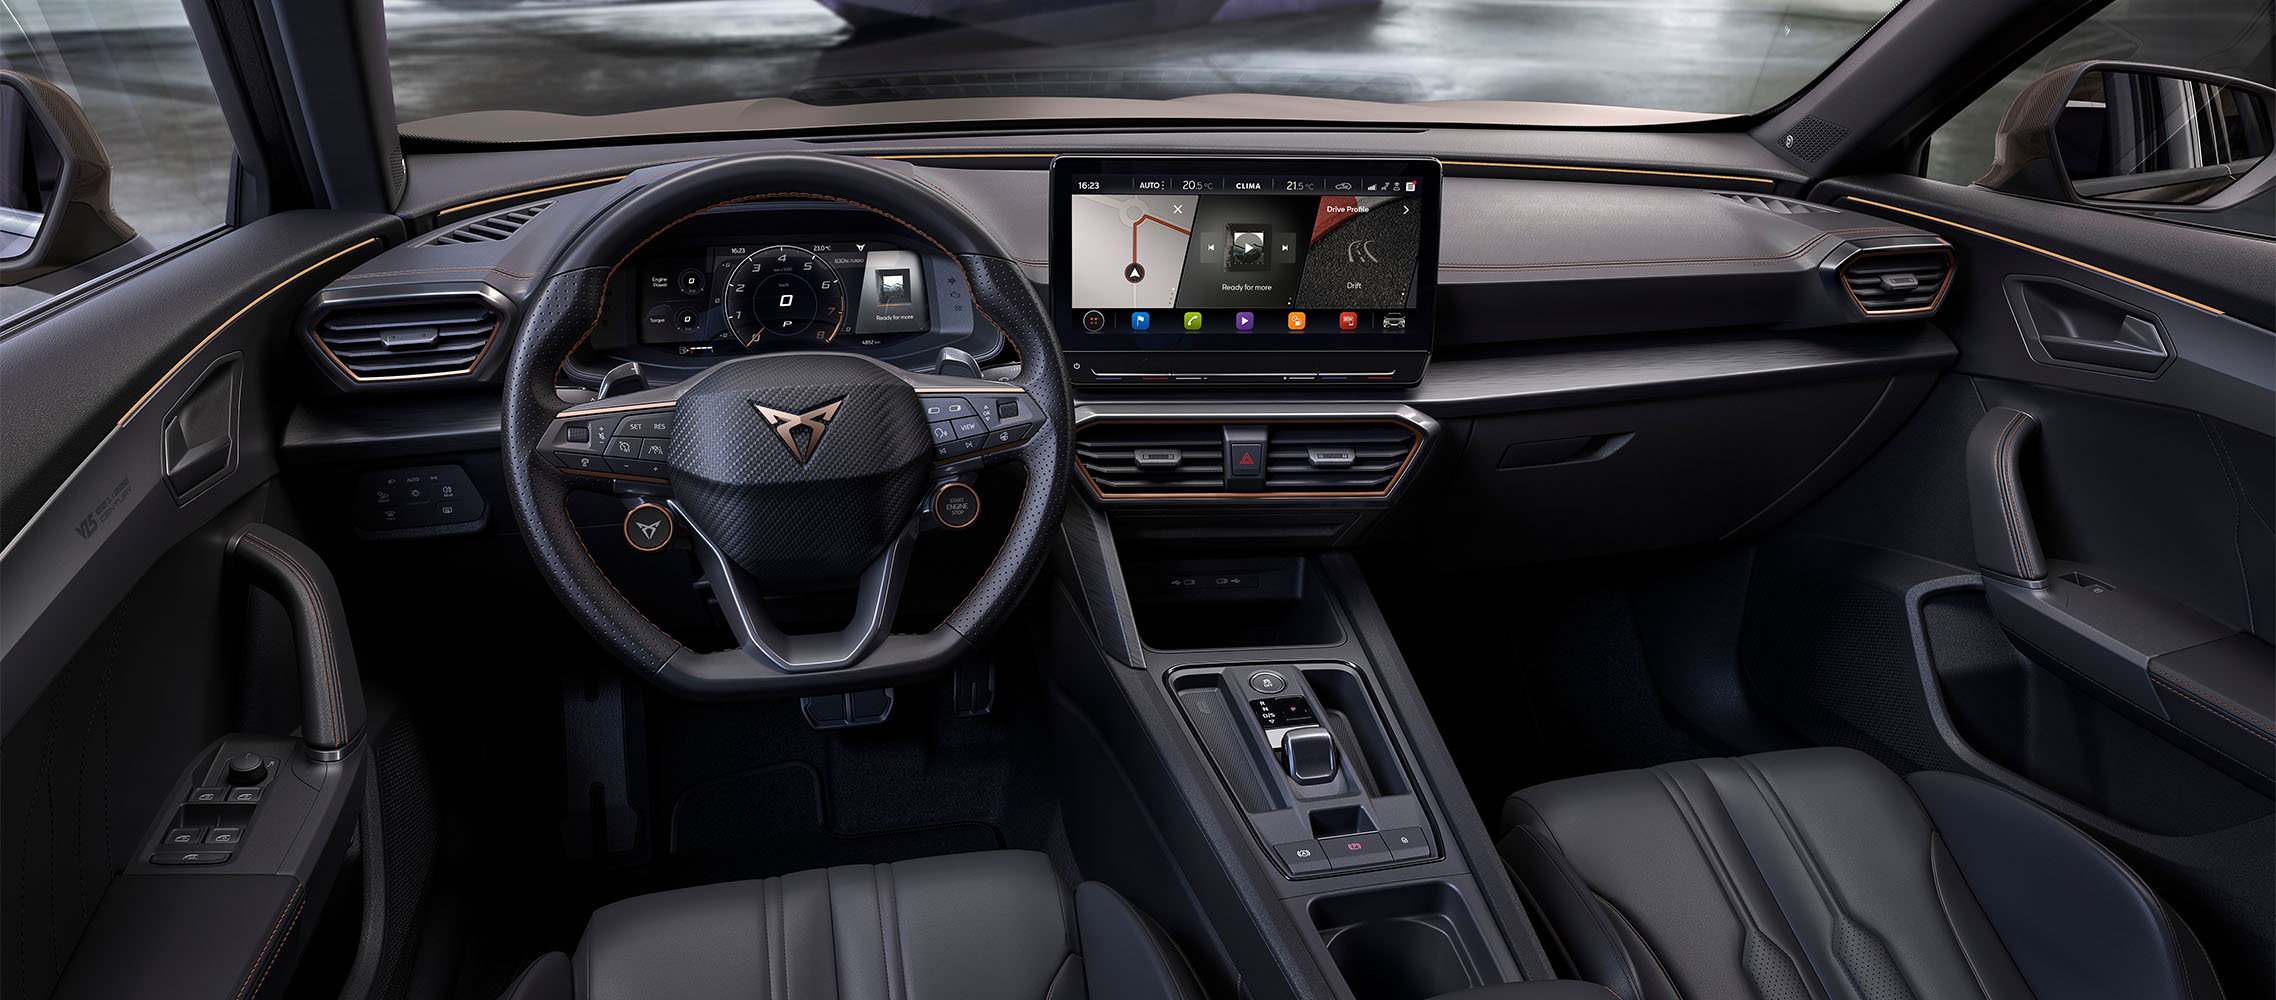 Century Bronze CUPRA Formentor VZ5 with sportive sophisticated interior – Special Limited Edition